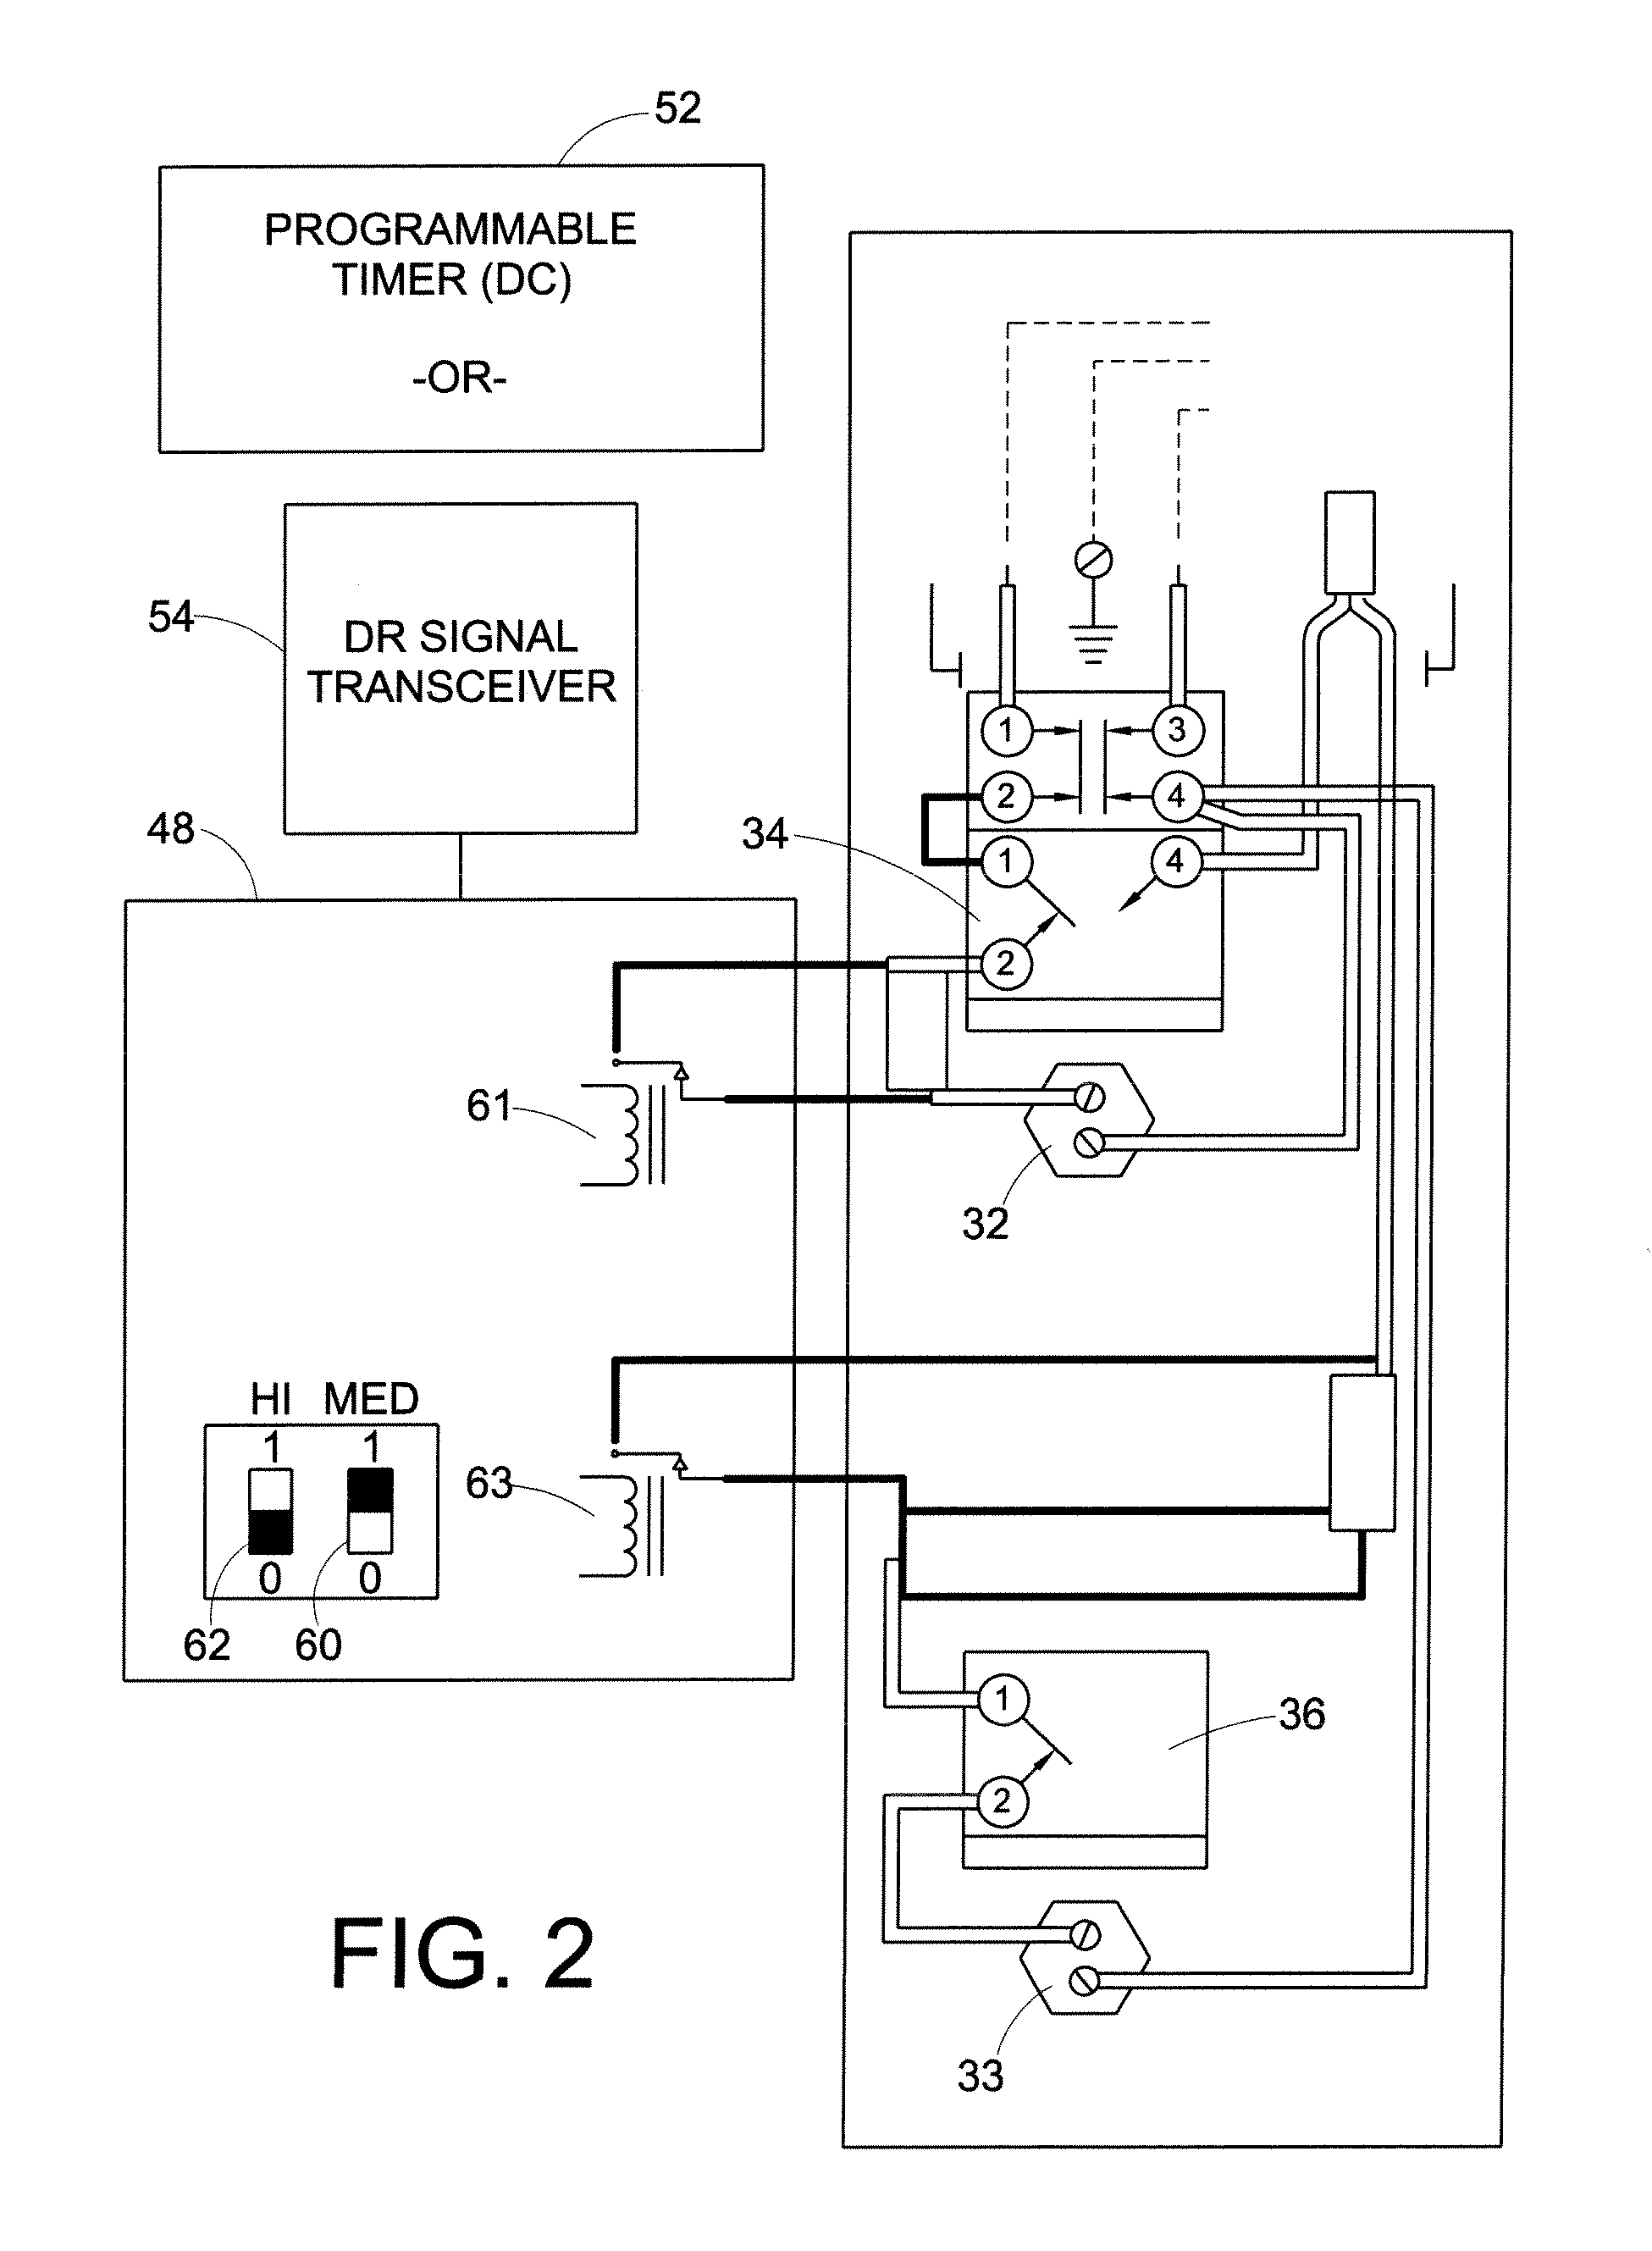 Water heating control and storage system